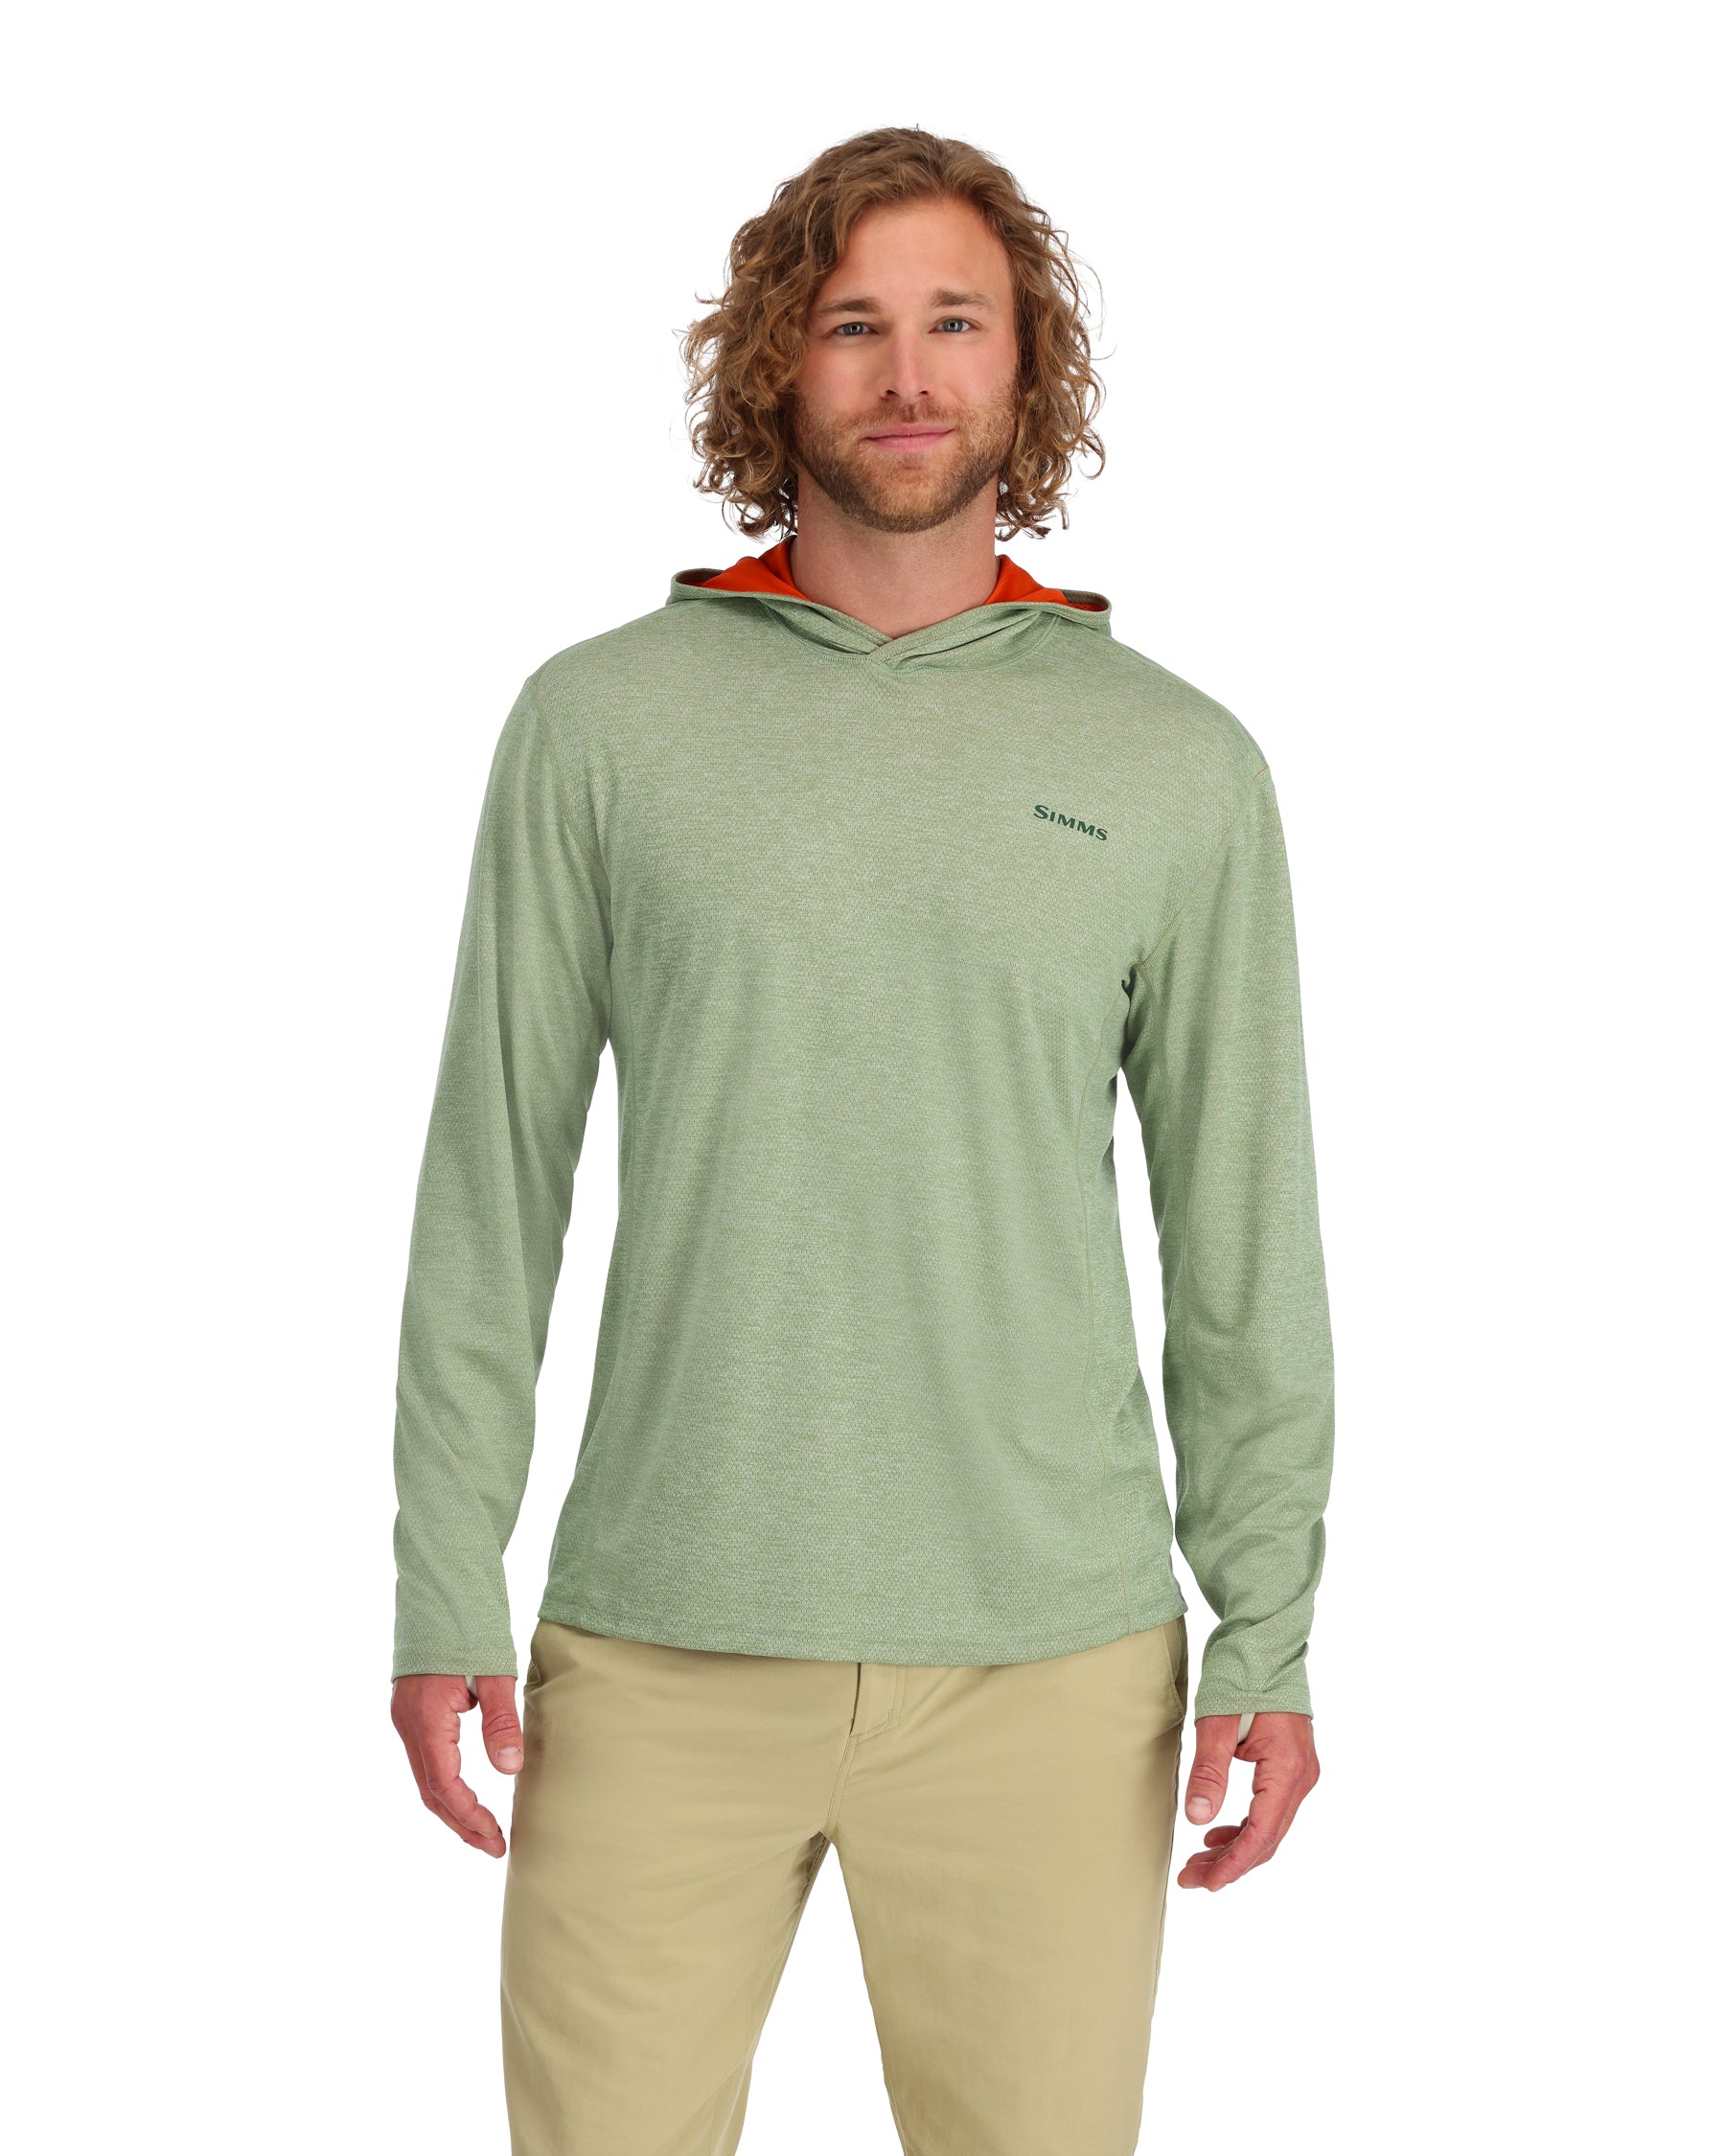 M's Bugstopper® Hoody | Simms Fishing Products